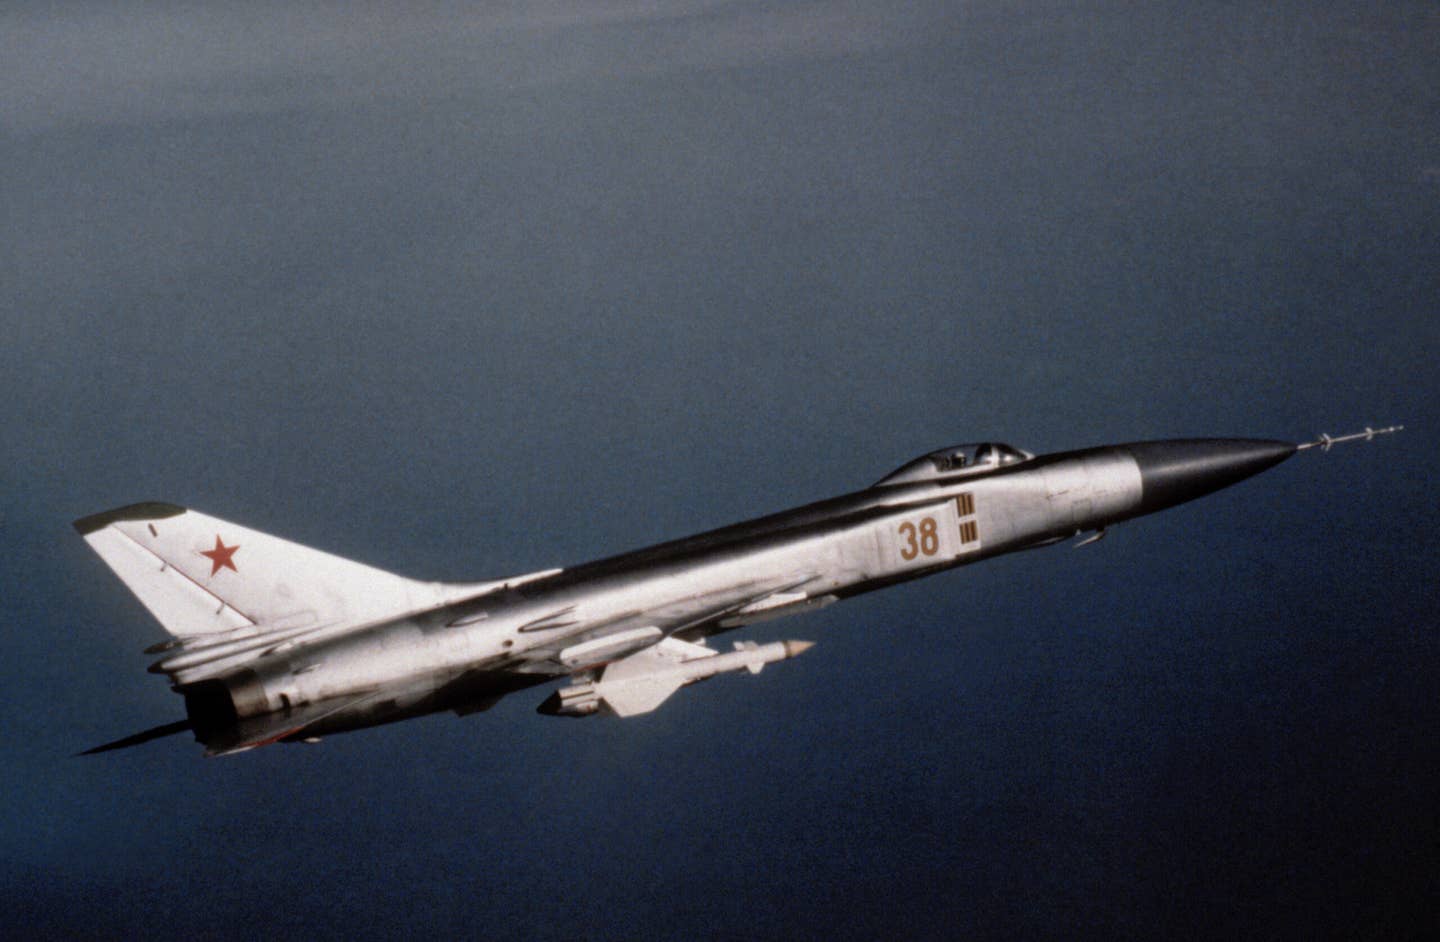 A Su-15TM Flagon interceptor. Typical of Soviet Cold War heavy fighter jets, the Su-15 was not an ideal platform for finding and destroying balloons. <em>Public Domain</em>